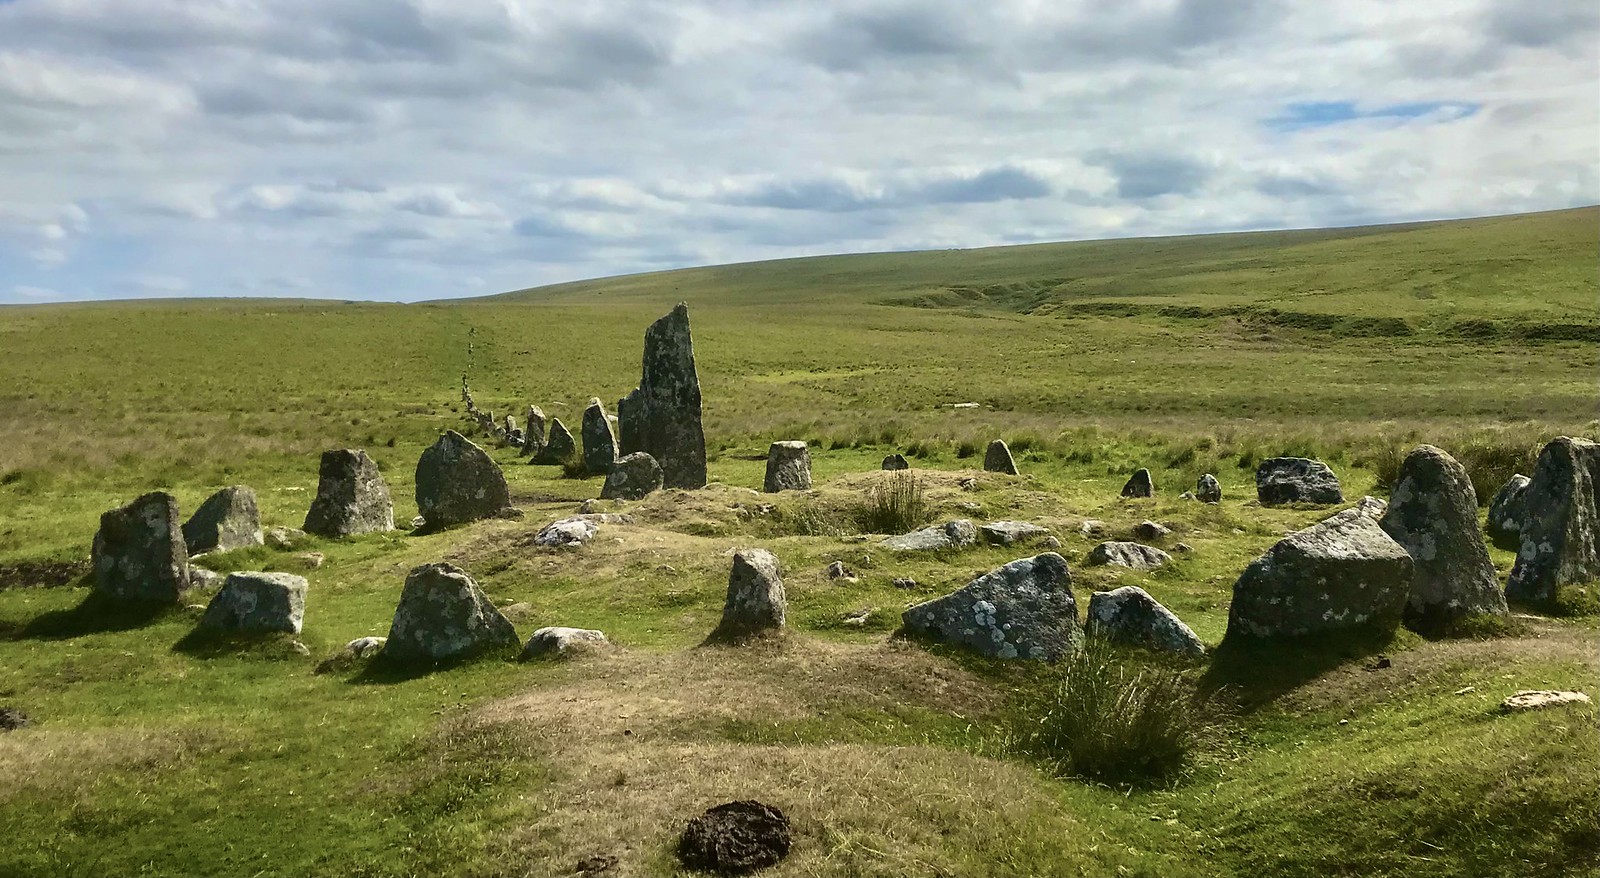 The impressive Down Tow stone circle and row